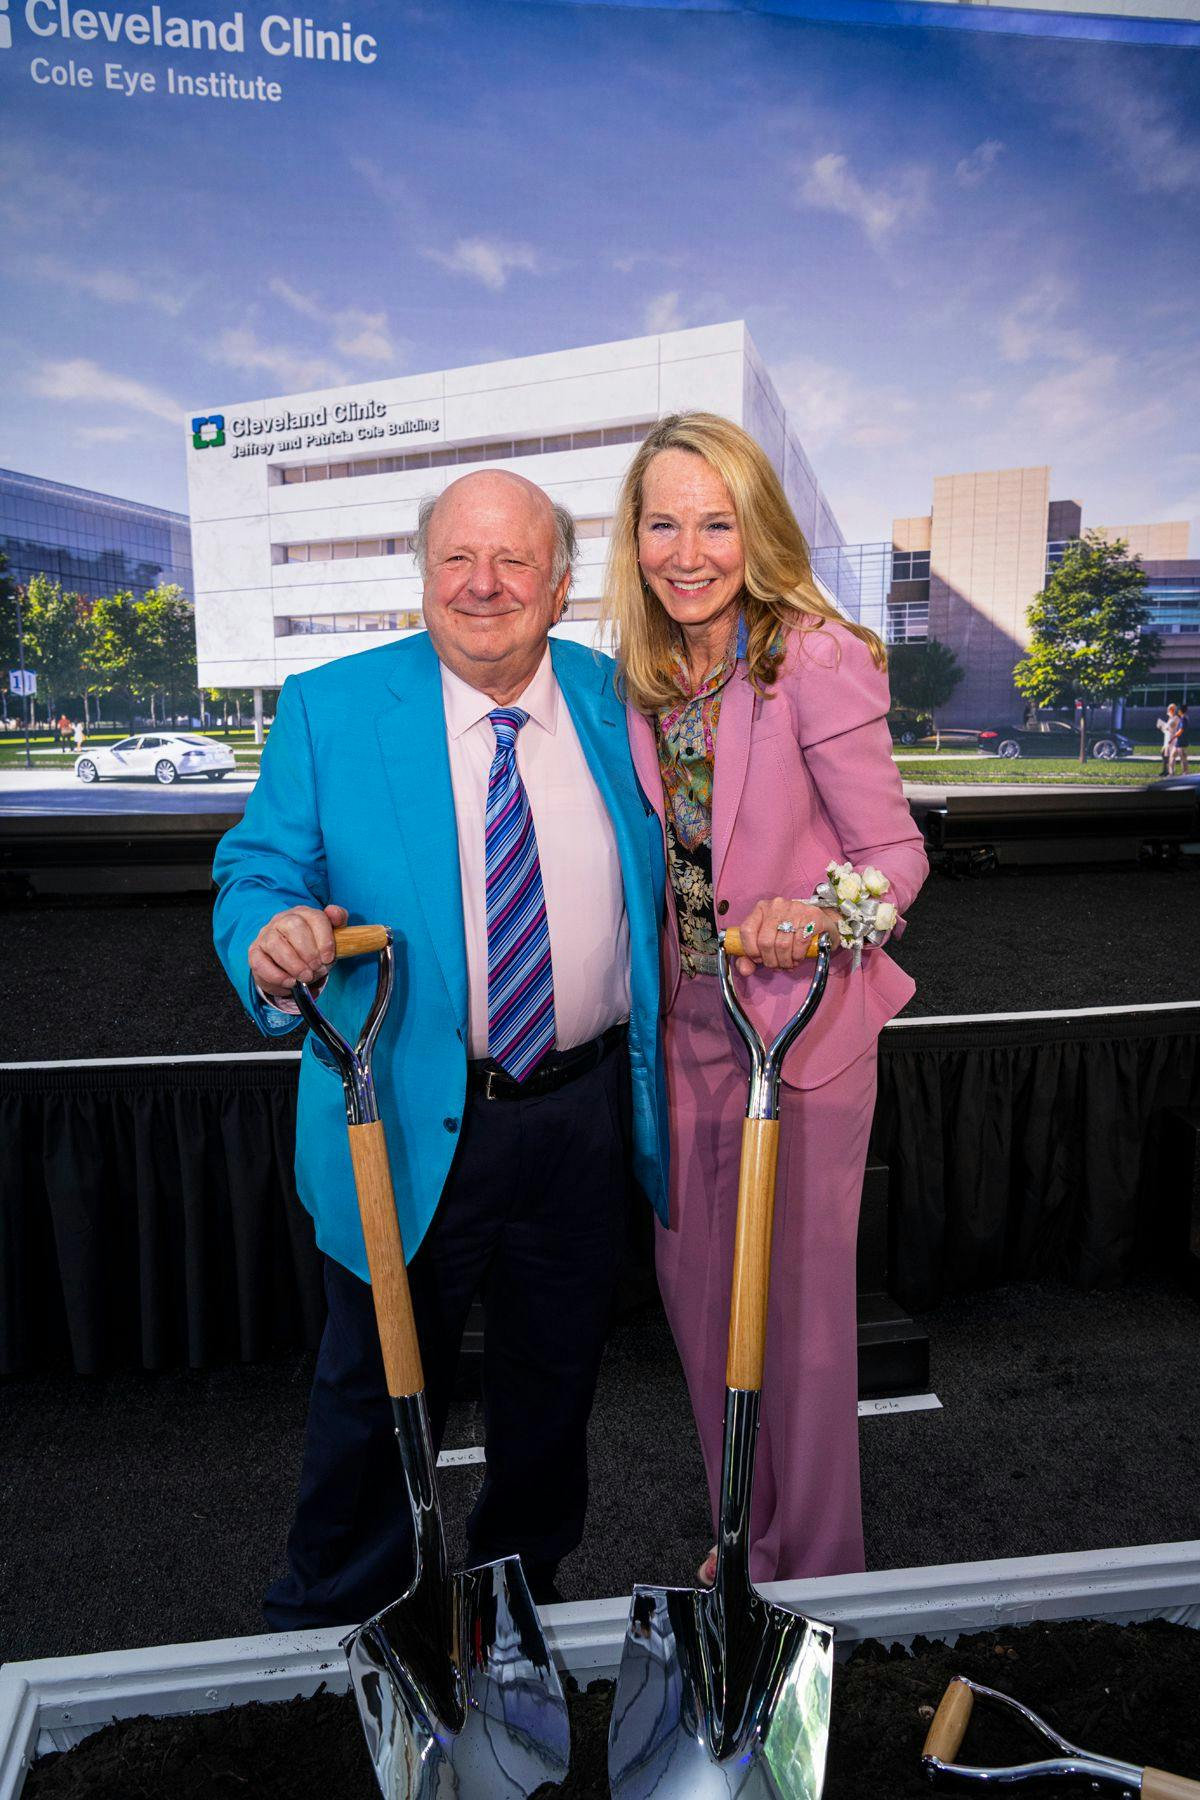 Jeffrey A. Cole and his wife Patricia O’Brien Cole. (Image courtesy of Cleveland Clinic)